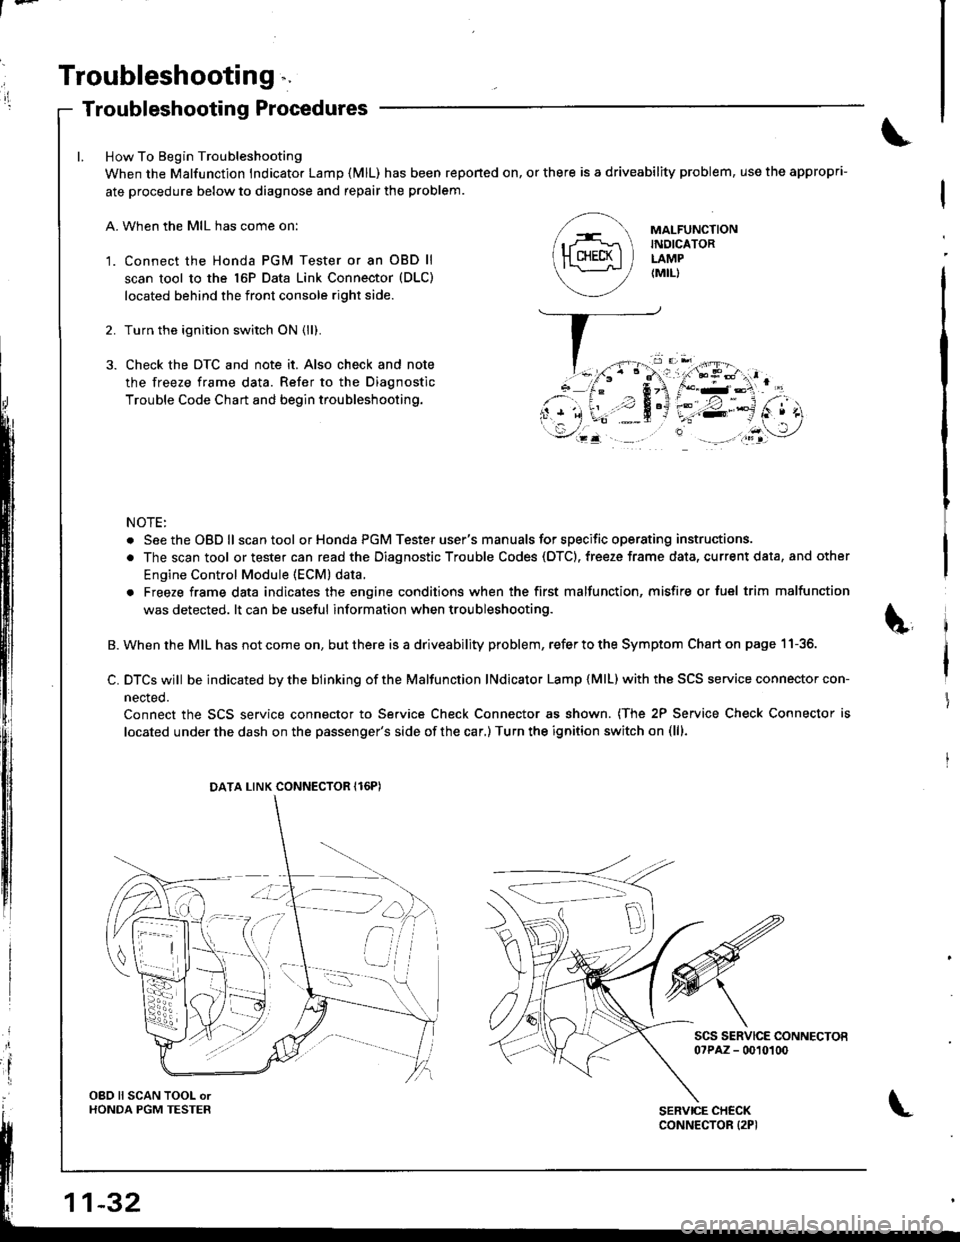 HONDA INTEGRA 1998 4.G Workshop Manual t-
il
Troubleshooting ".
Troubleshooting Proccdures
How To Begin Troubleshooting
When the Malfunction lndicator Lamp {MlL) has been reponed on, or there is a driveability problem, use the appropri-
at